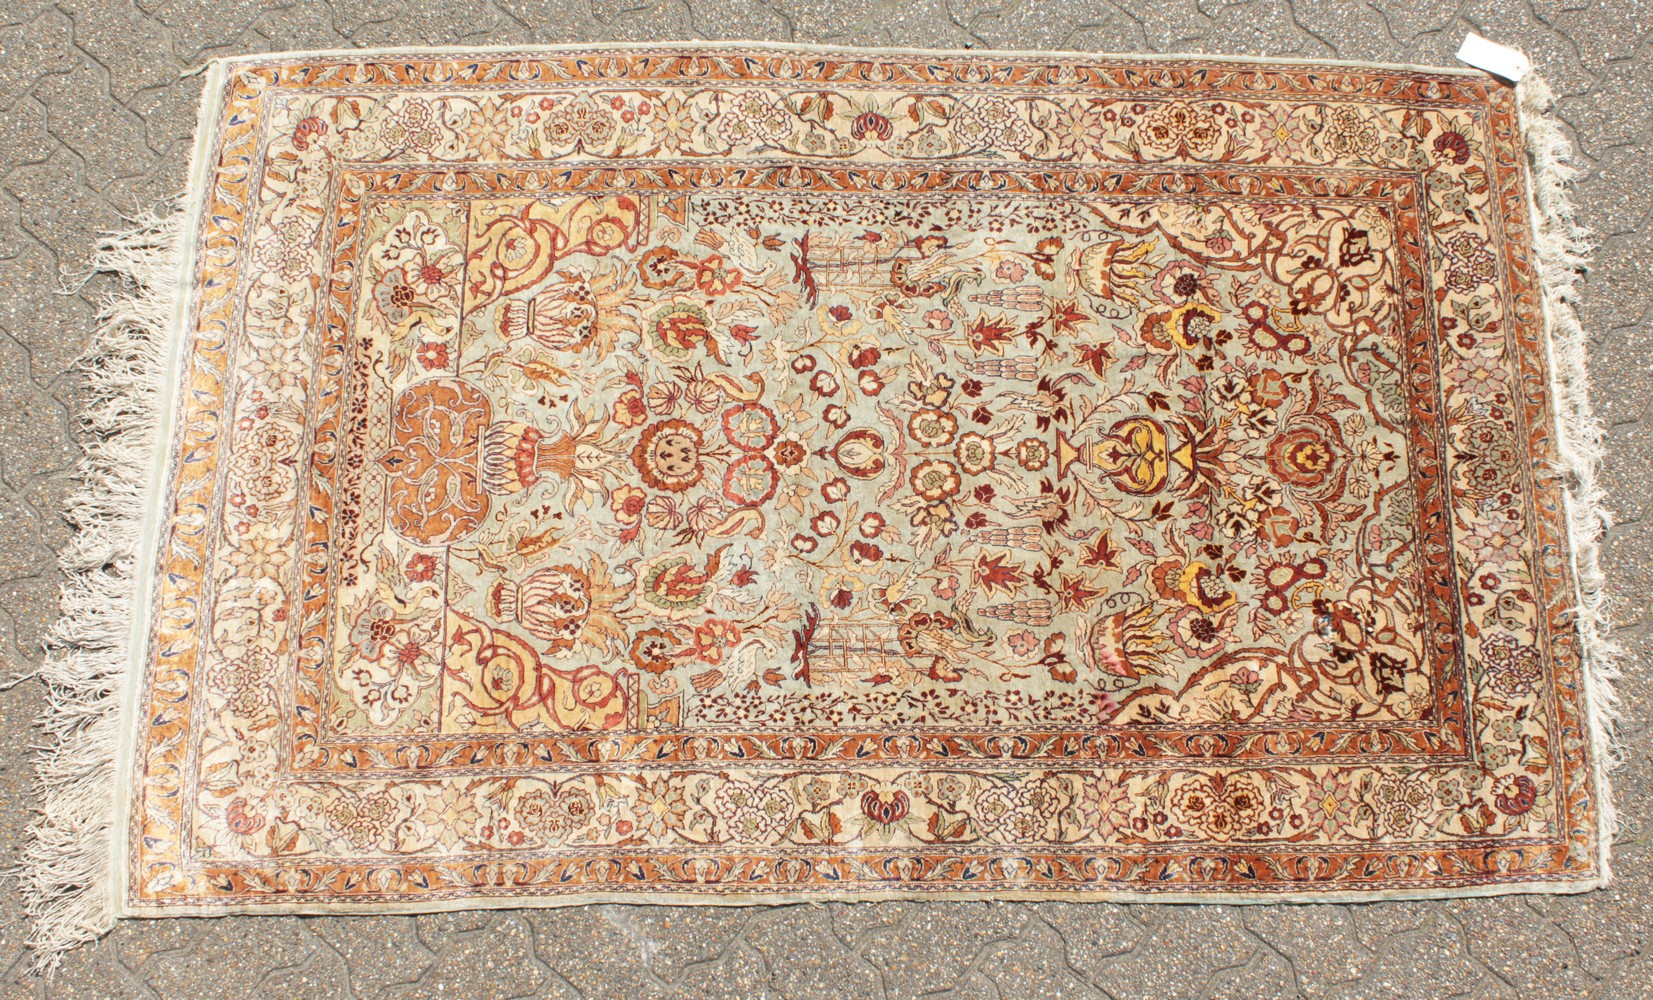 A FINE TURKISH SILK RUG with allover pattern of birds and flowers. 6ft 10ins x 4ft 3ins.